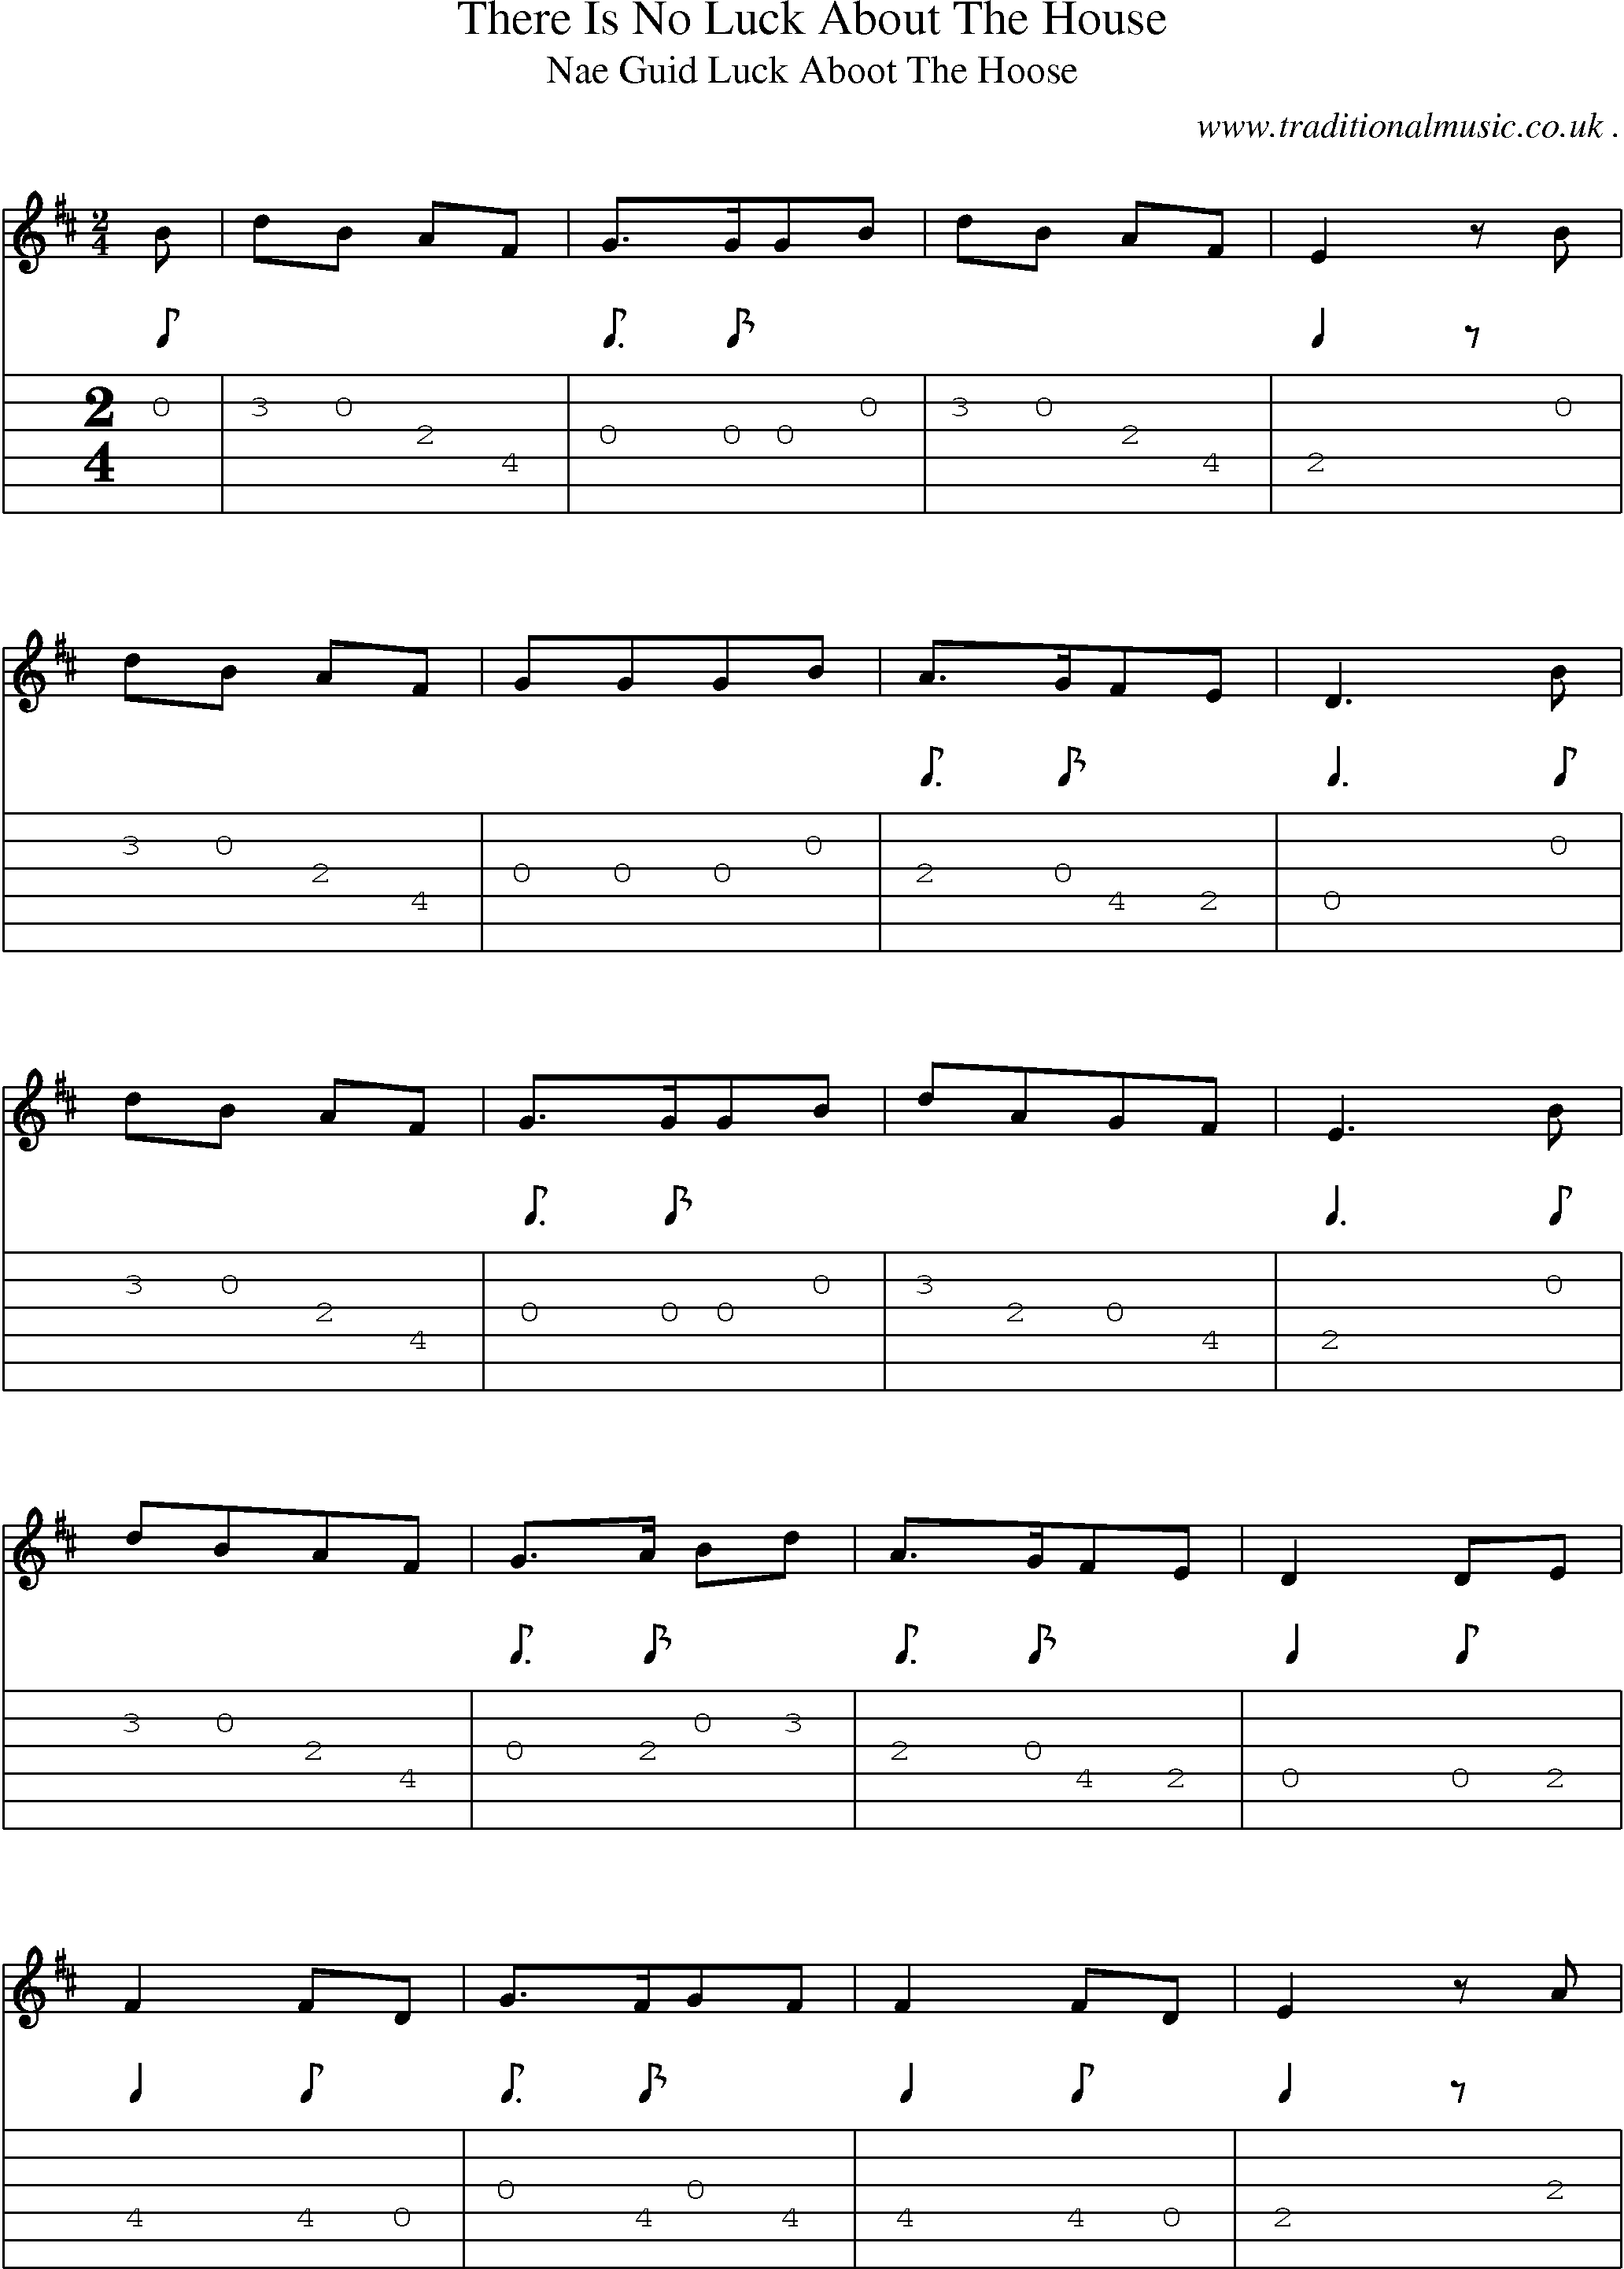 Sheet-Music and Guitar Tabs for There Is No Luck About The House